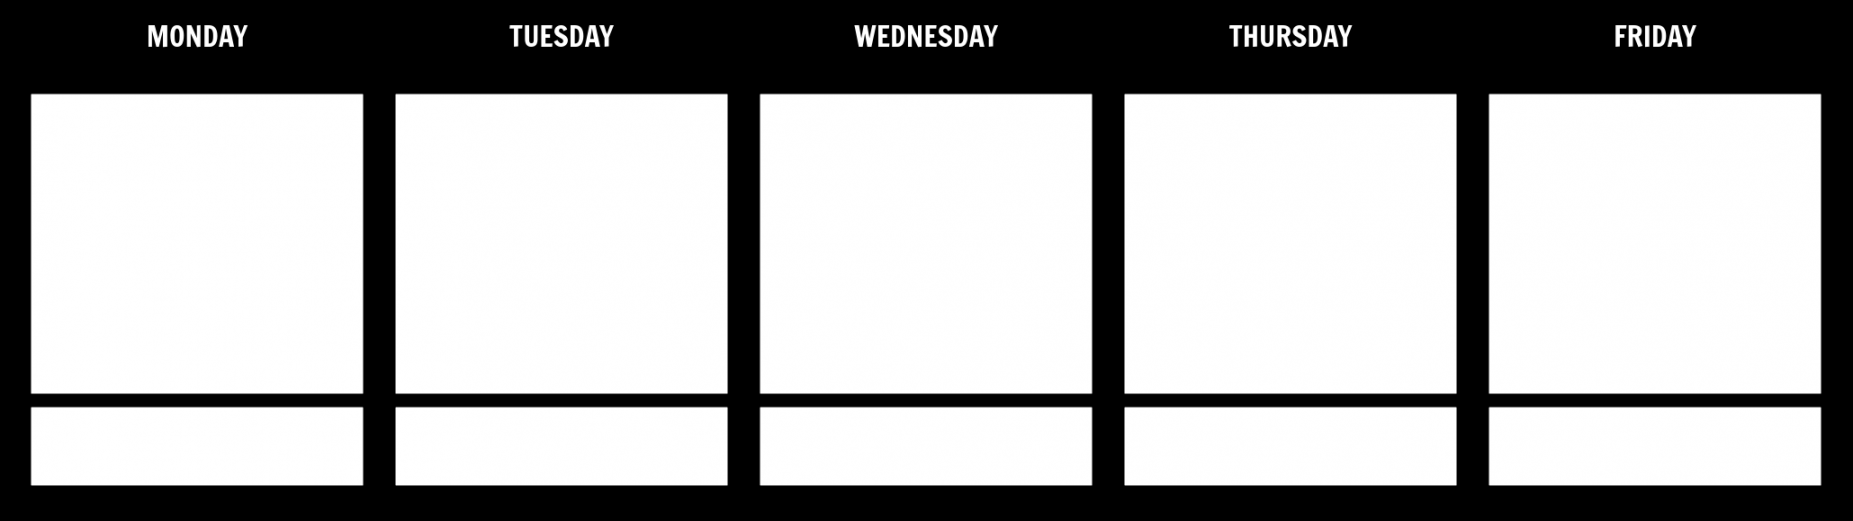 Days of the Week Storyboard by storyboard-templates